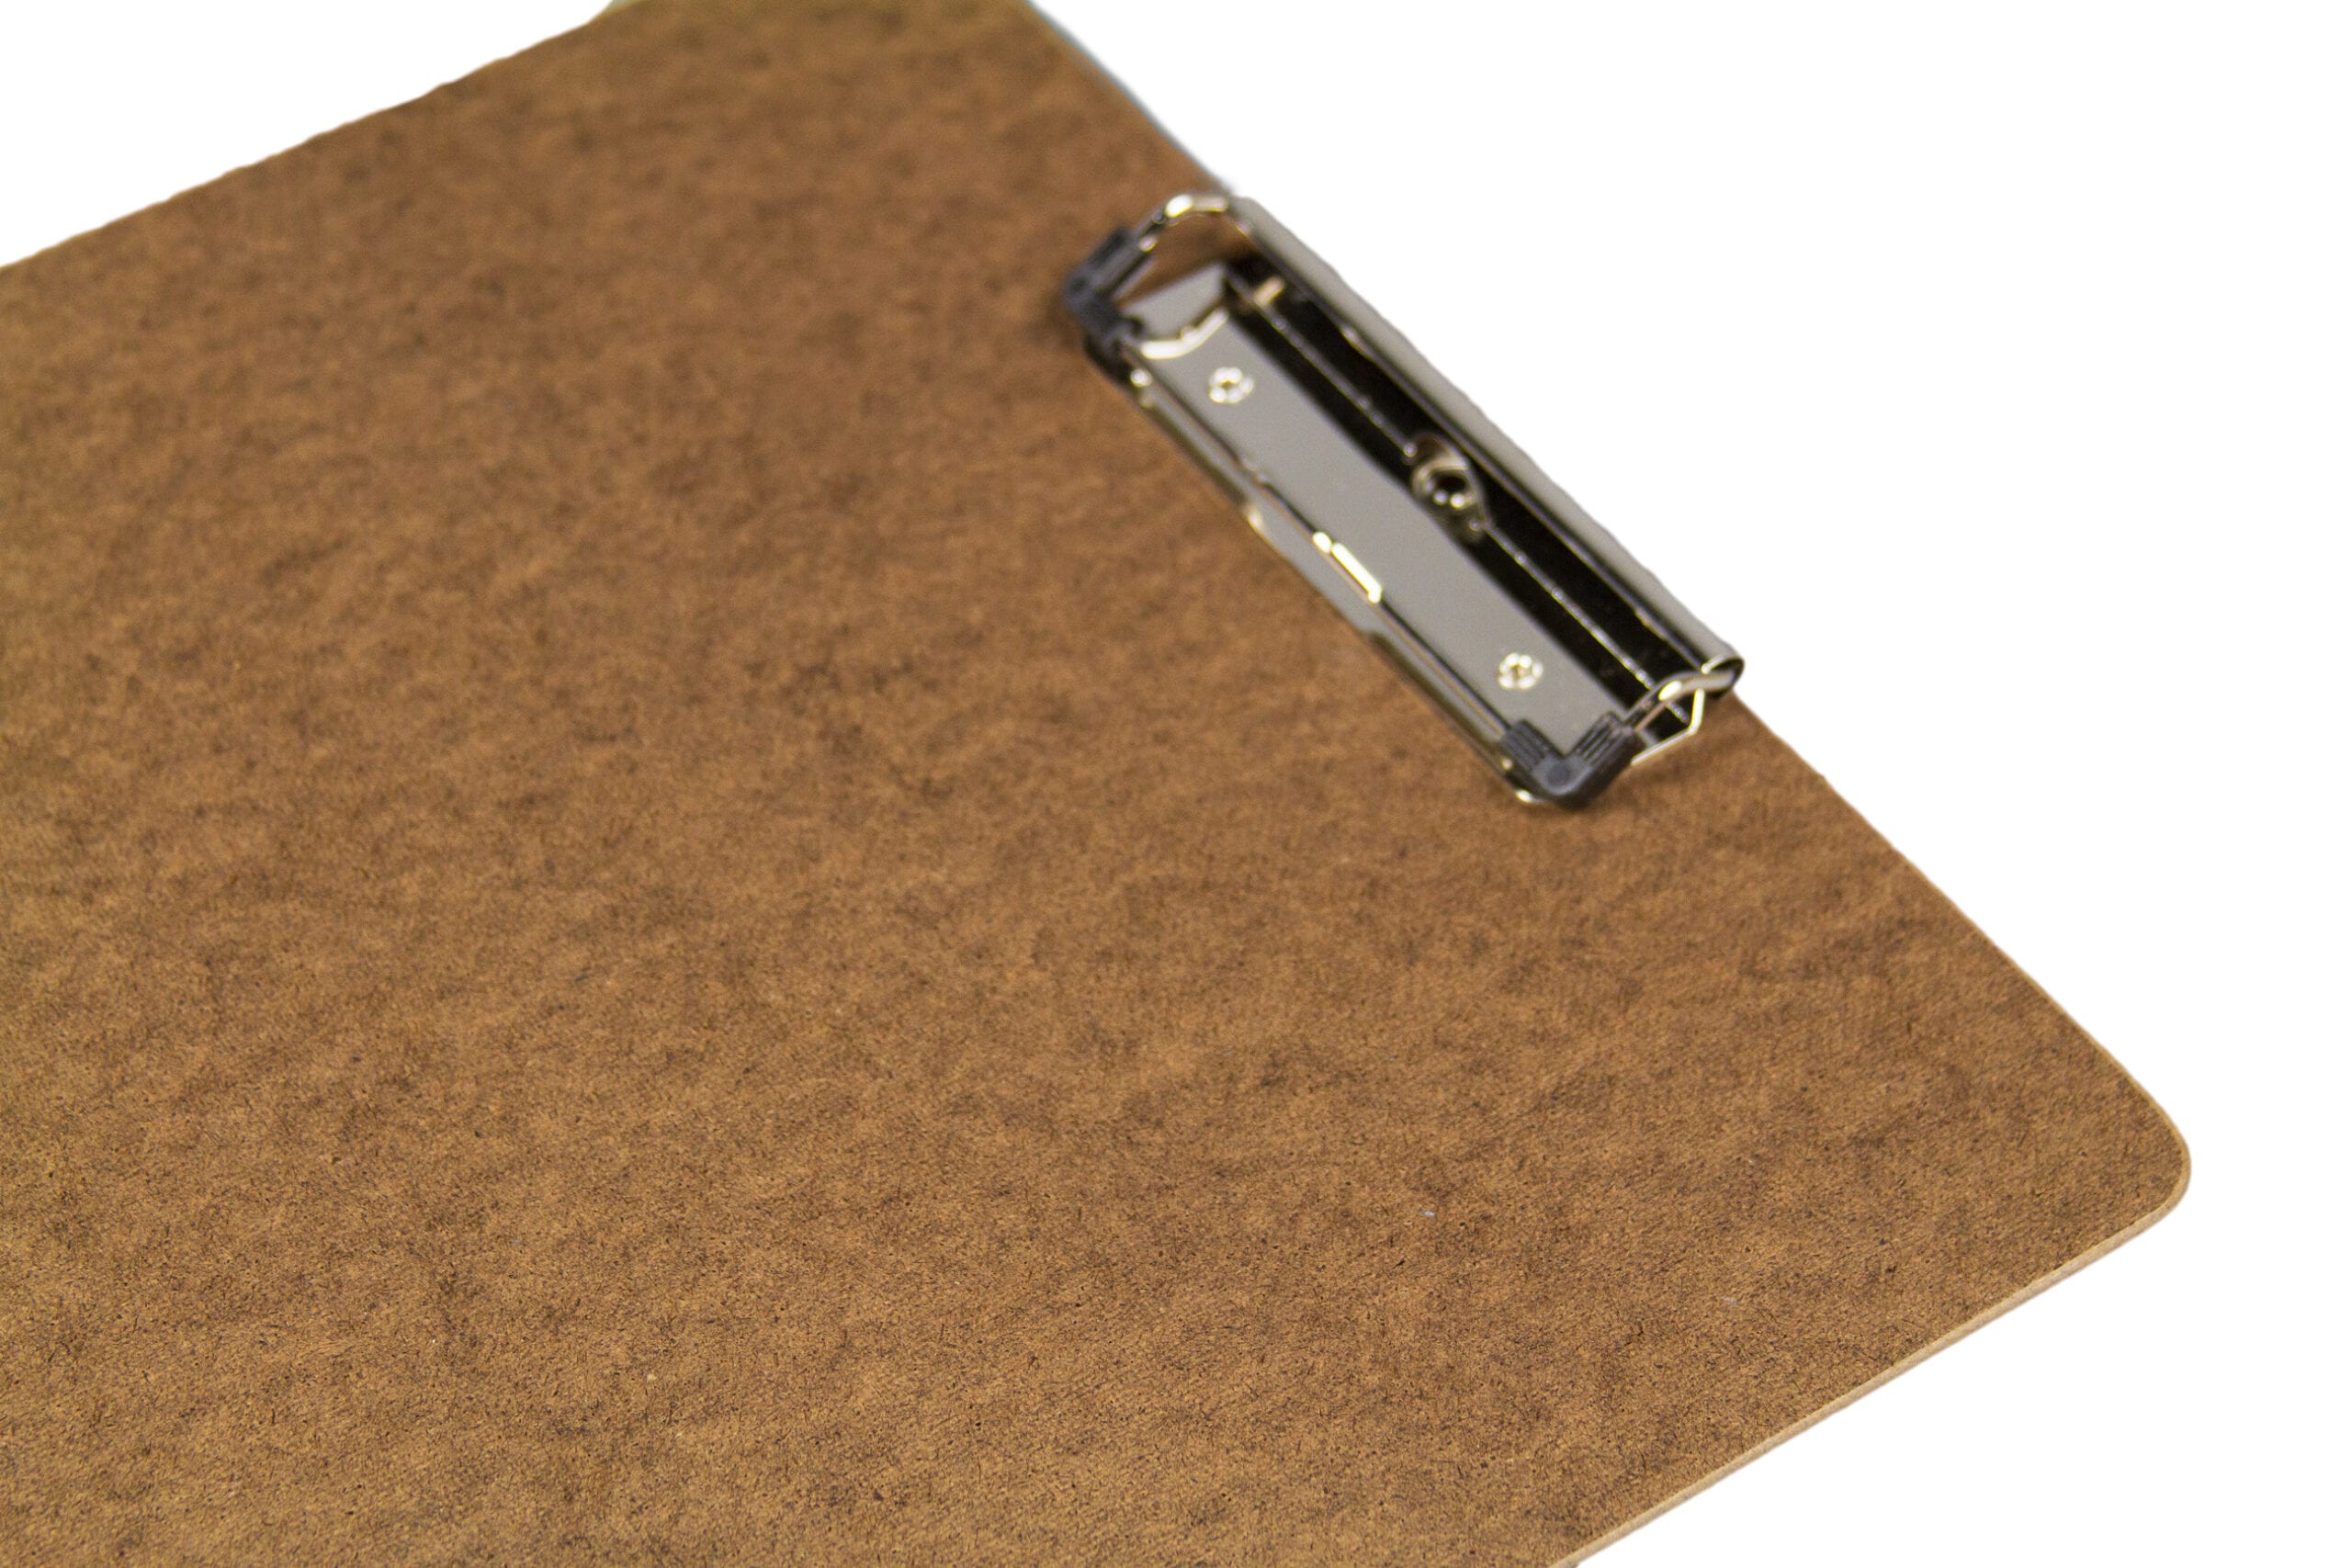 11x17 clipboards